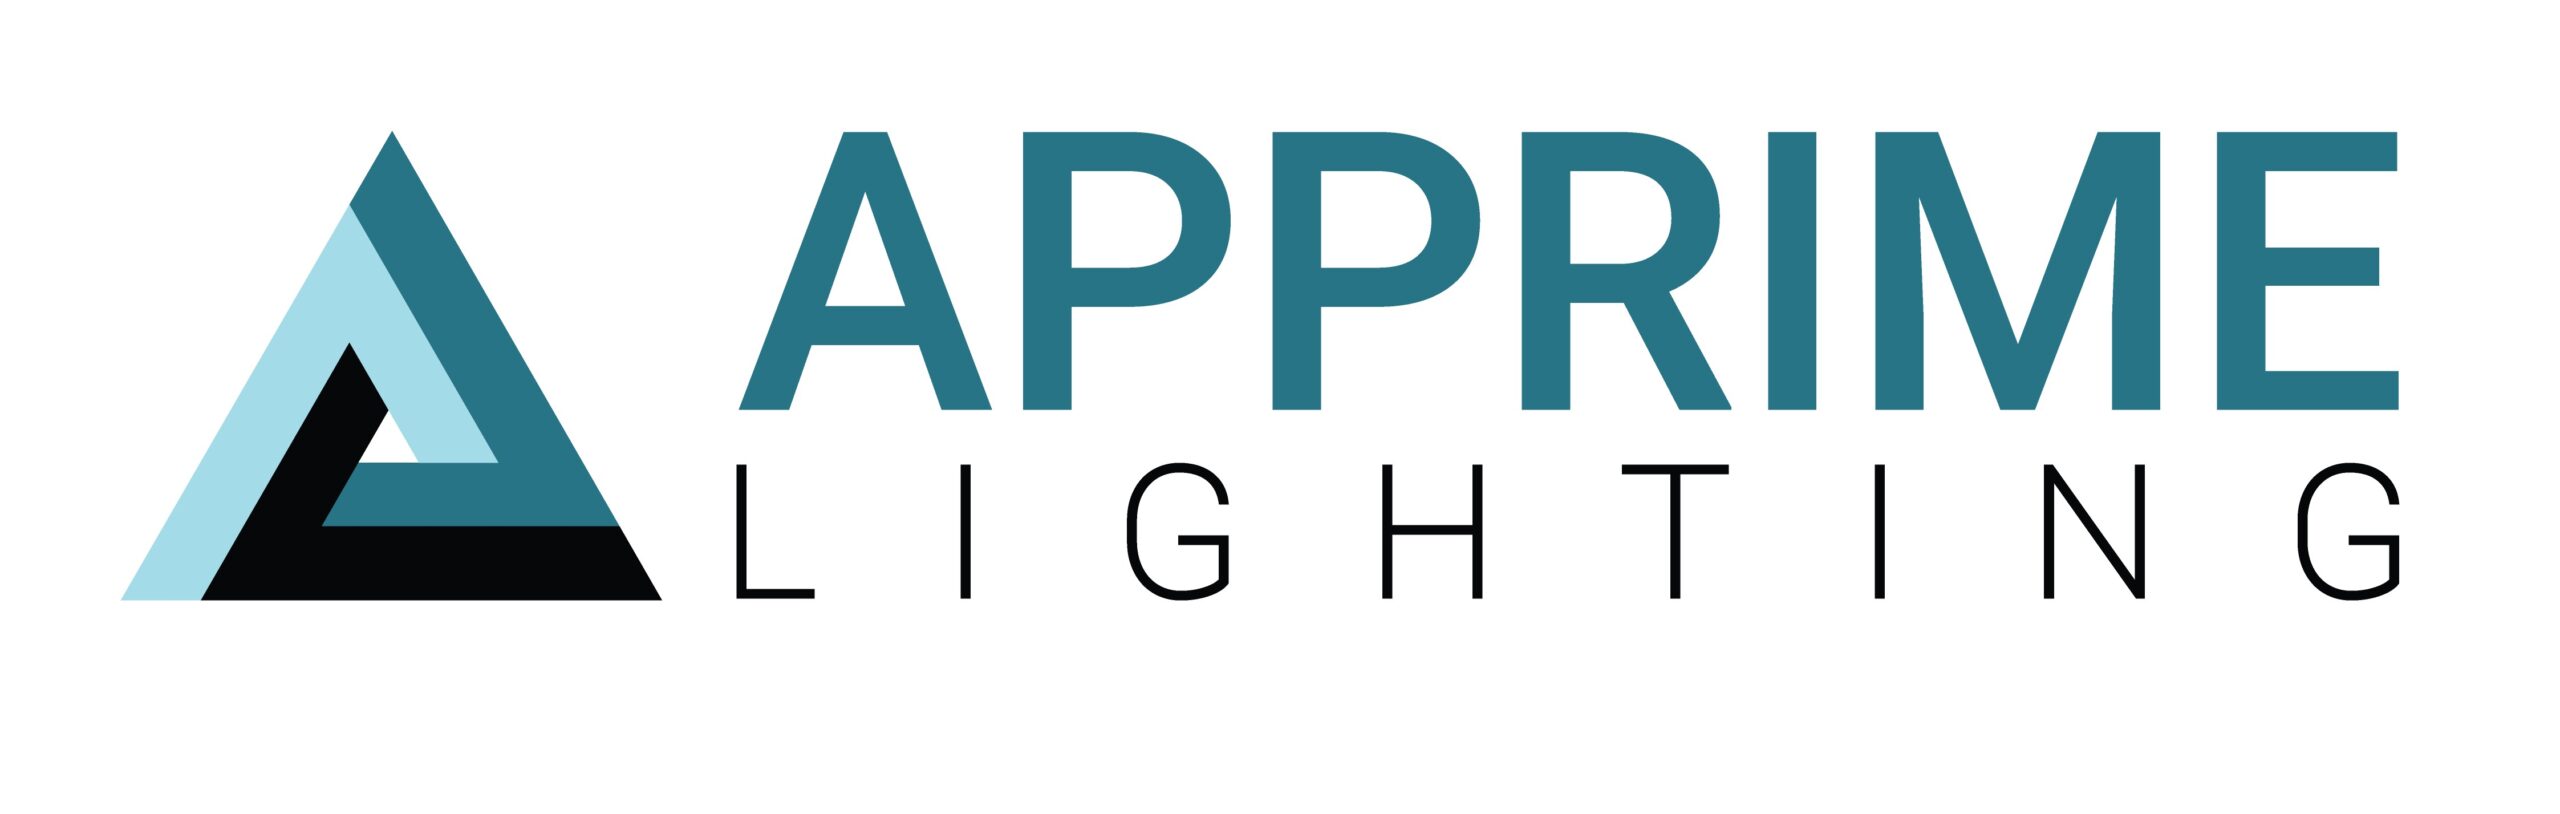 APPRIME LIGHTING™ Launches